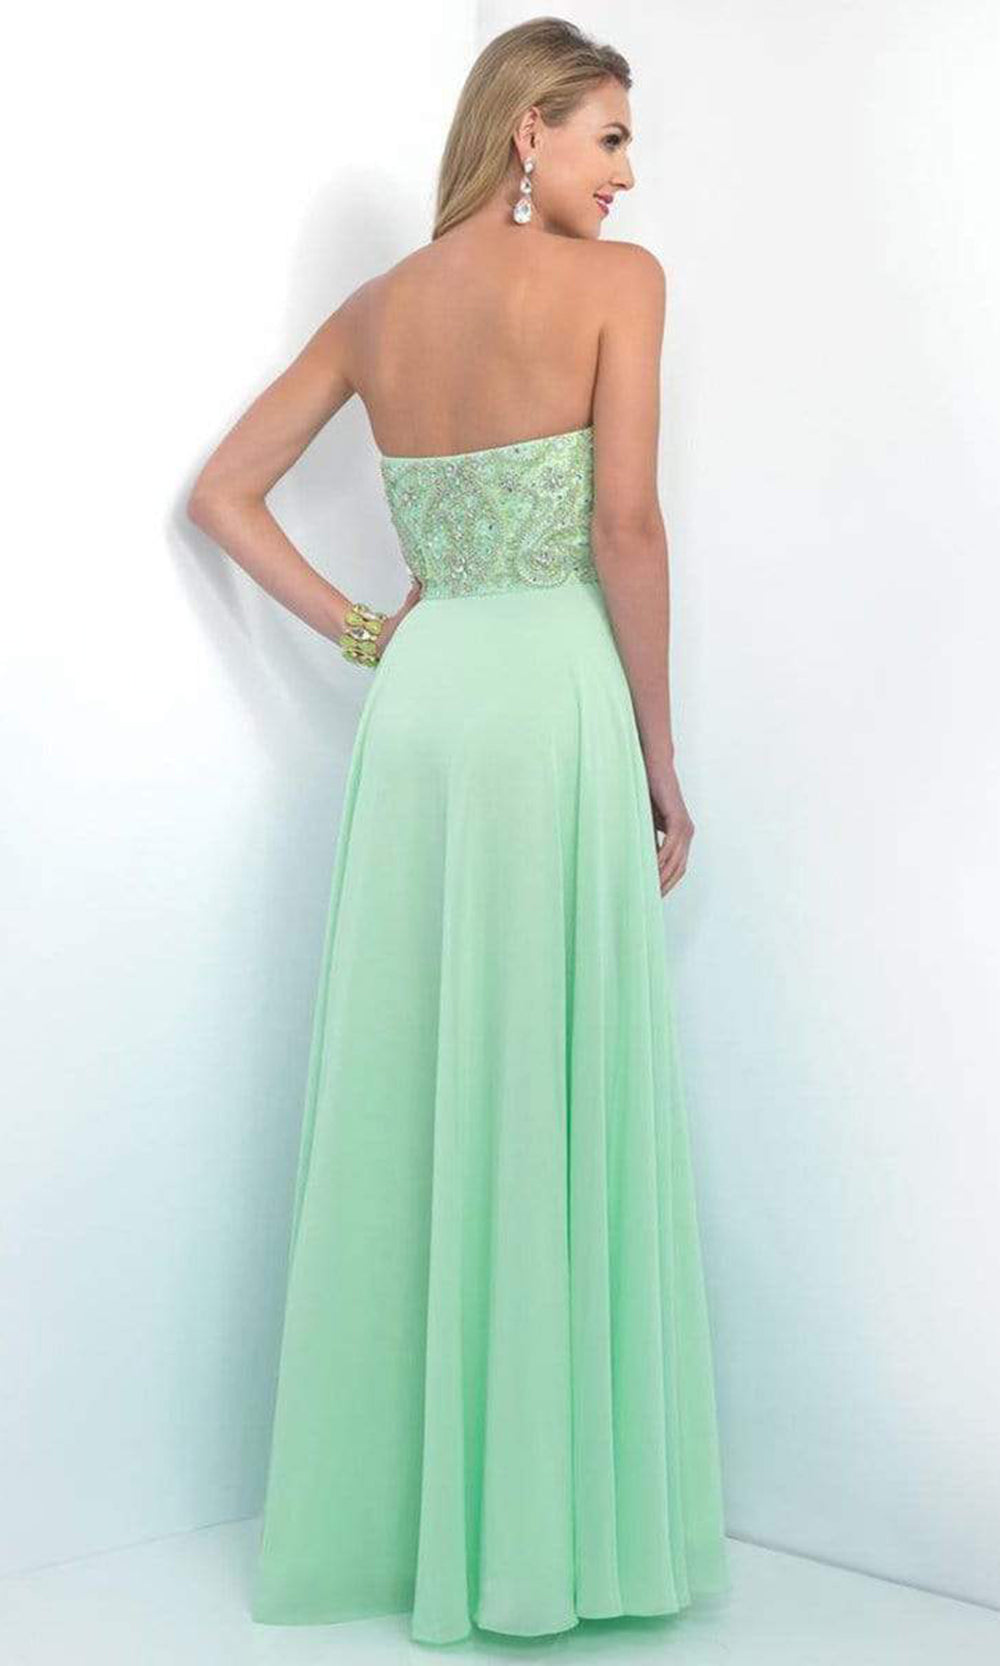 Intrigue - 164 Strapless Embellished Sweetheart Bodice A-line Dress - 1 pc Mint Green In Size 0 Available CCSALE 0 / Mint Green